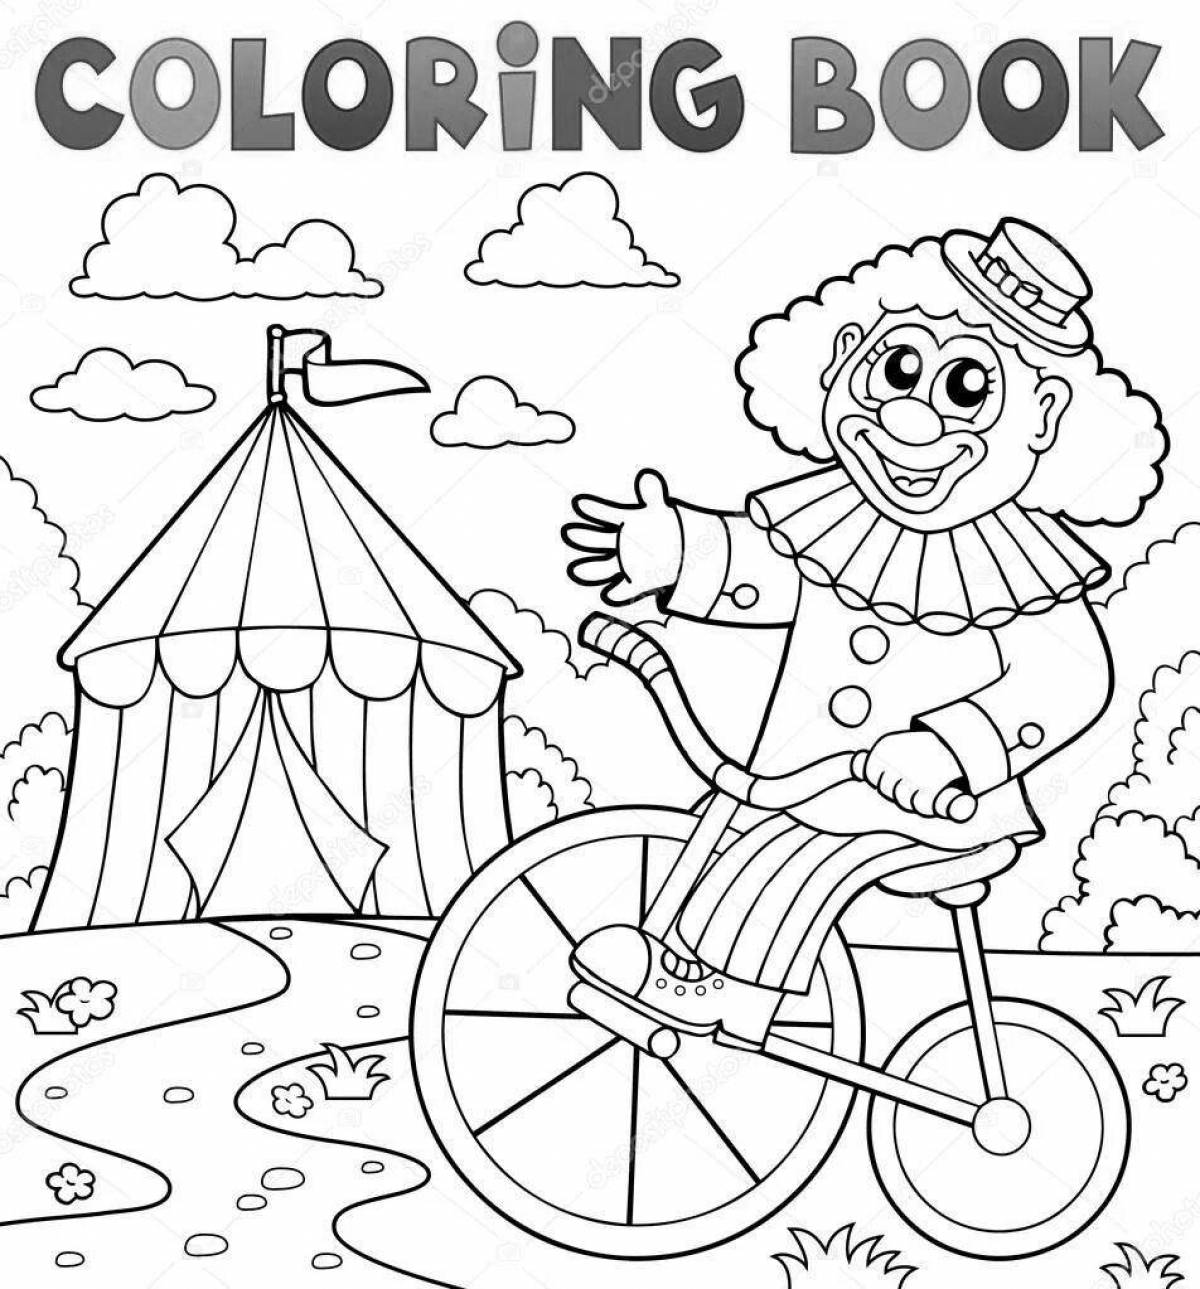 Live circus coloring book for kids 7-8 years old